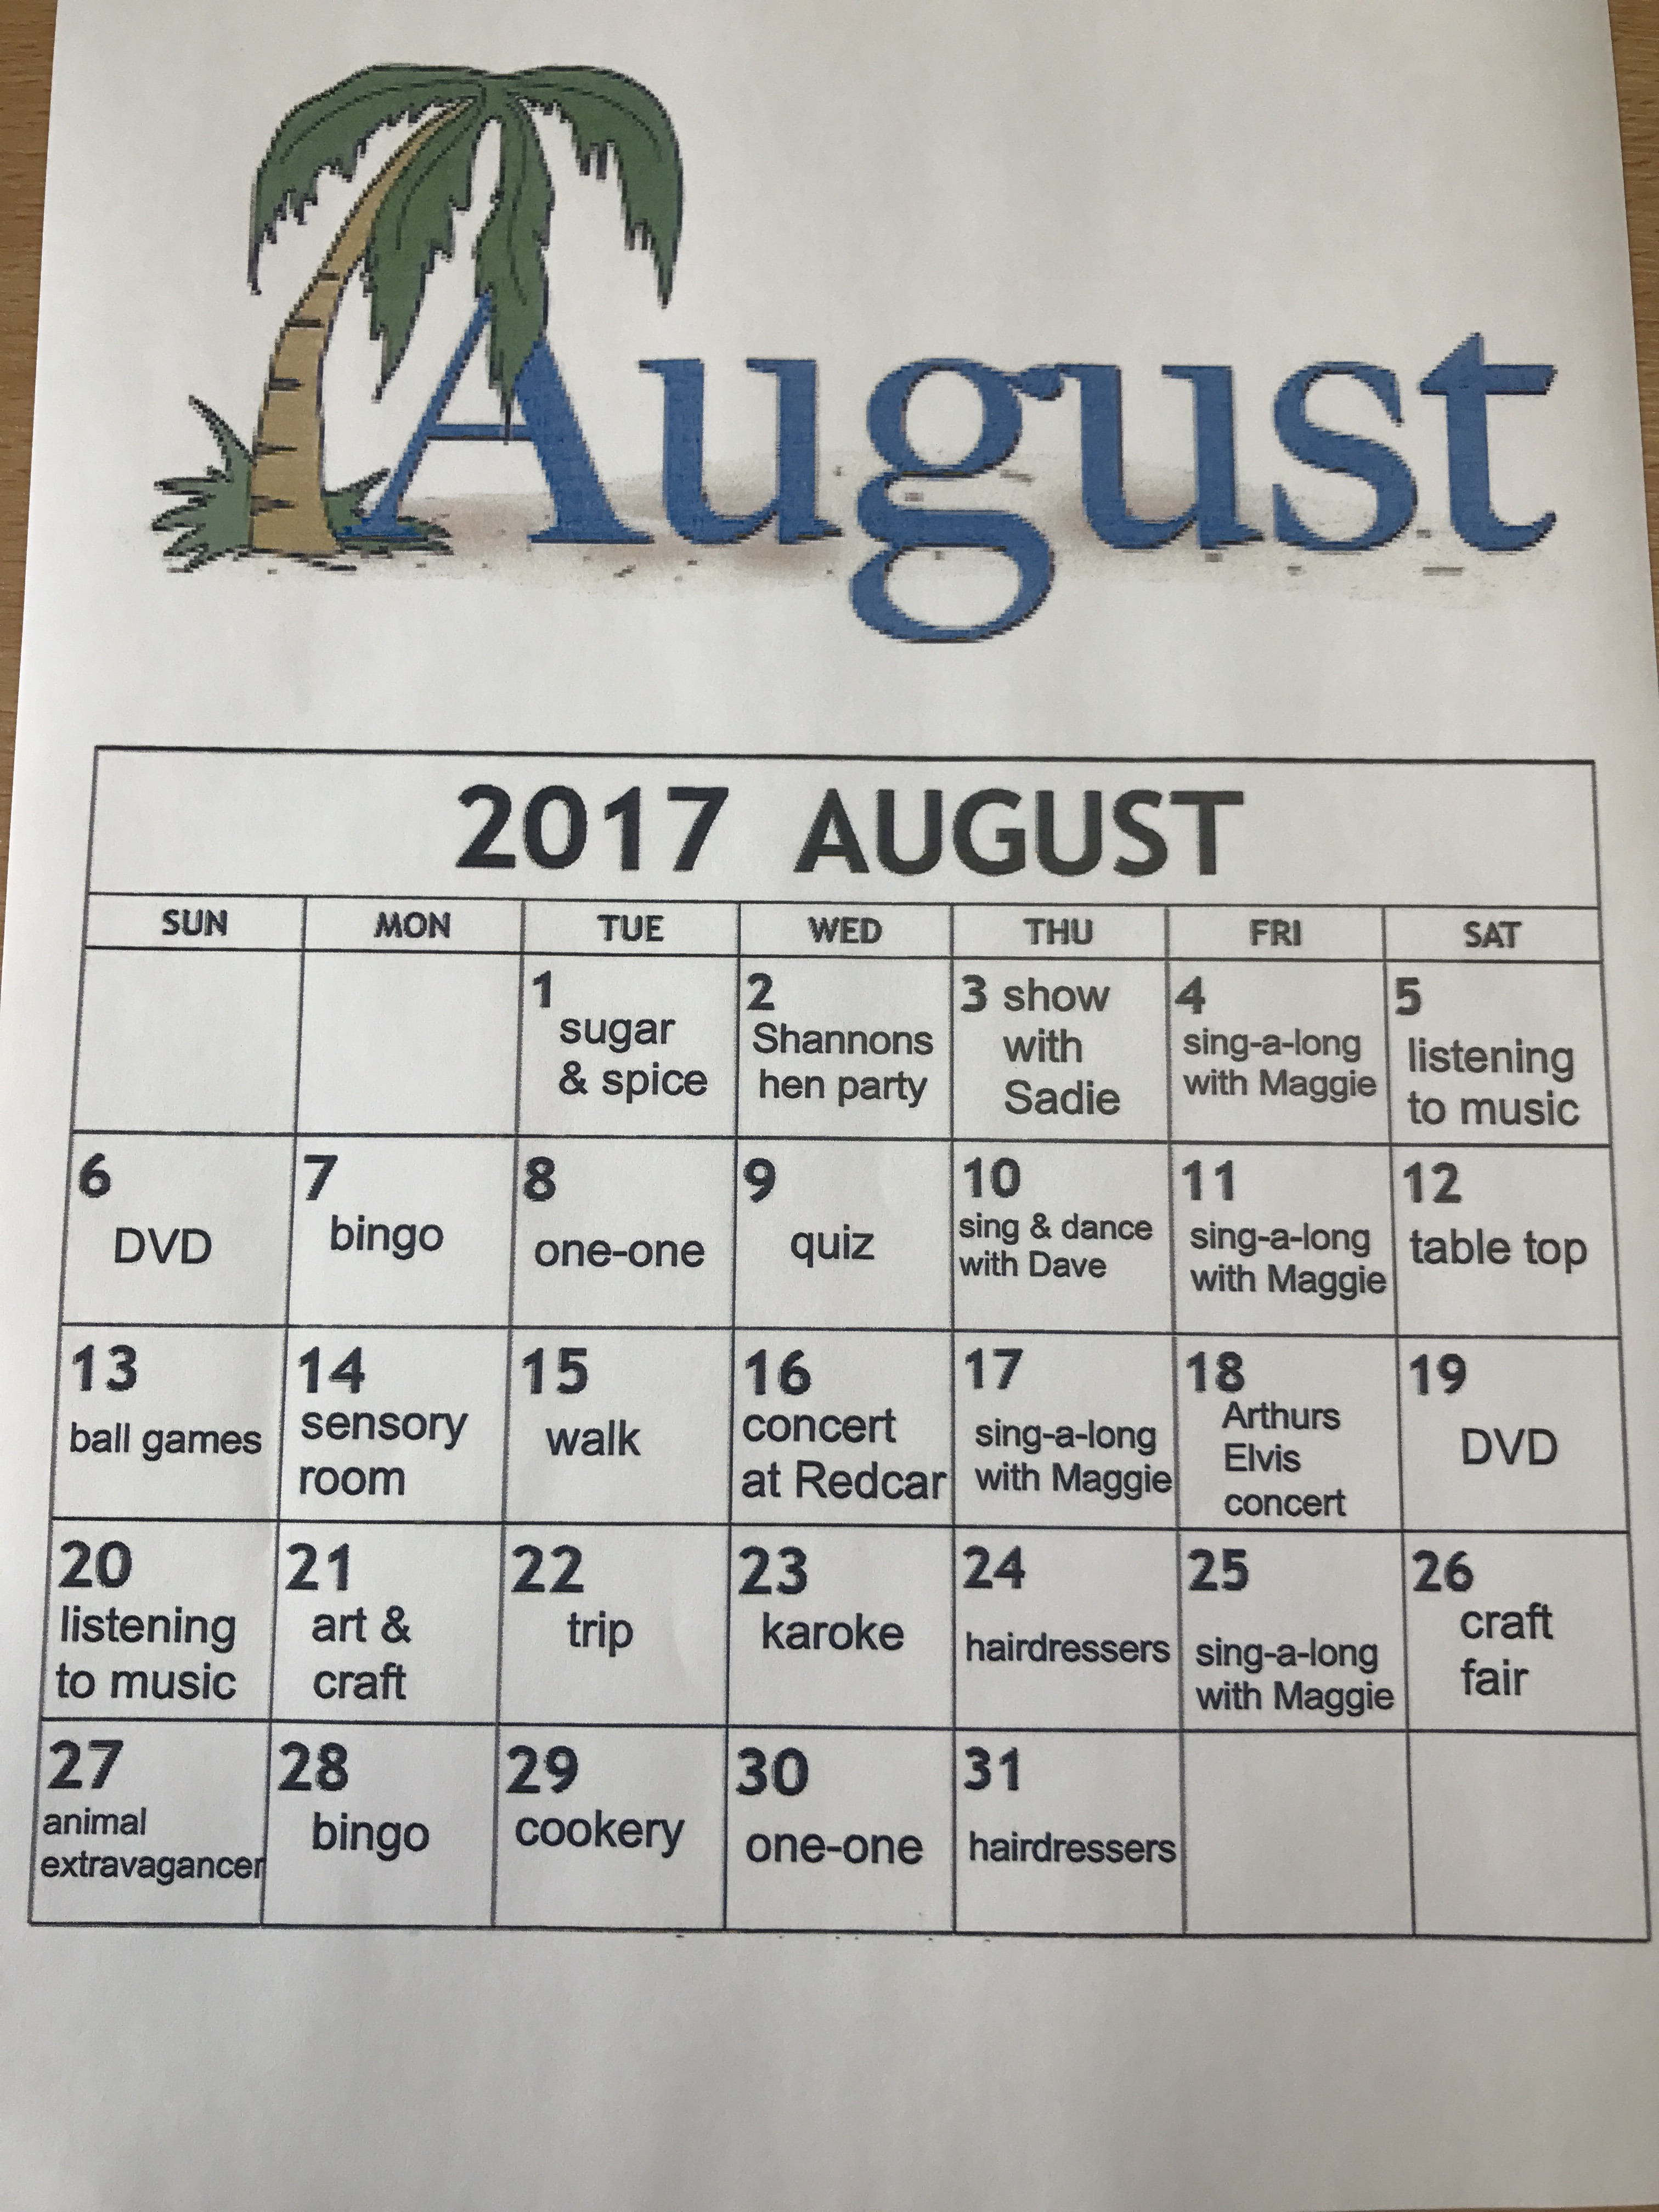 Planned Activities at Four Seasons Care Centre - August 2017: Key Healthcare is dedicated to caring for elderly residents in safe. We have multiple dementia care homes including our care home middlesbrough, our care home St. Helen and care home saltburn. We excel in monitoring and improving care levels.